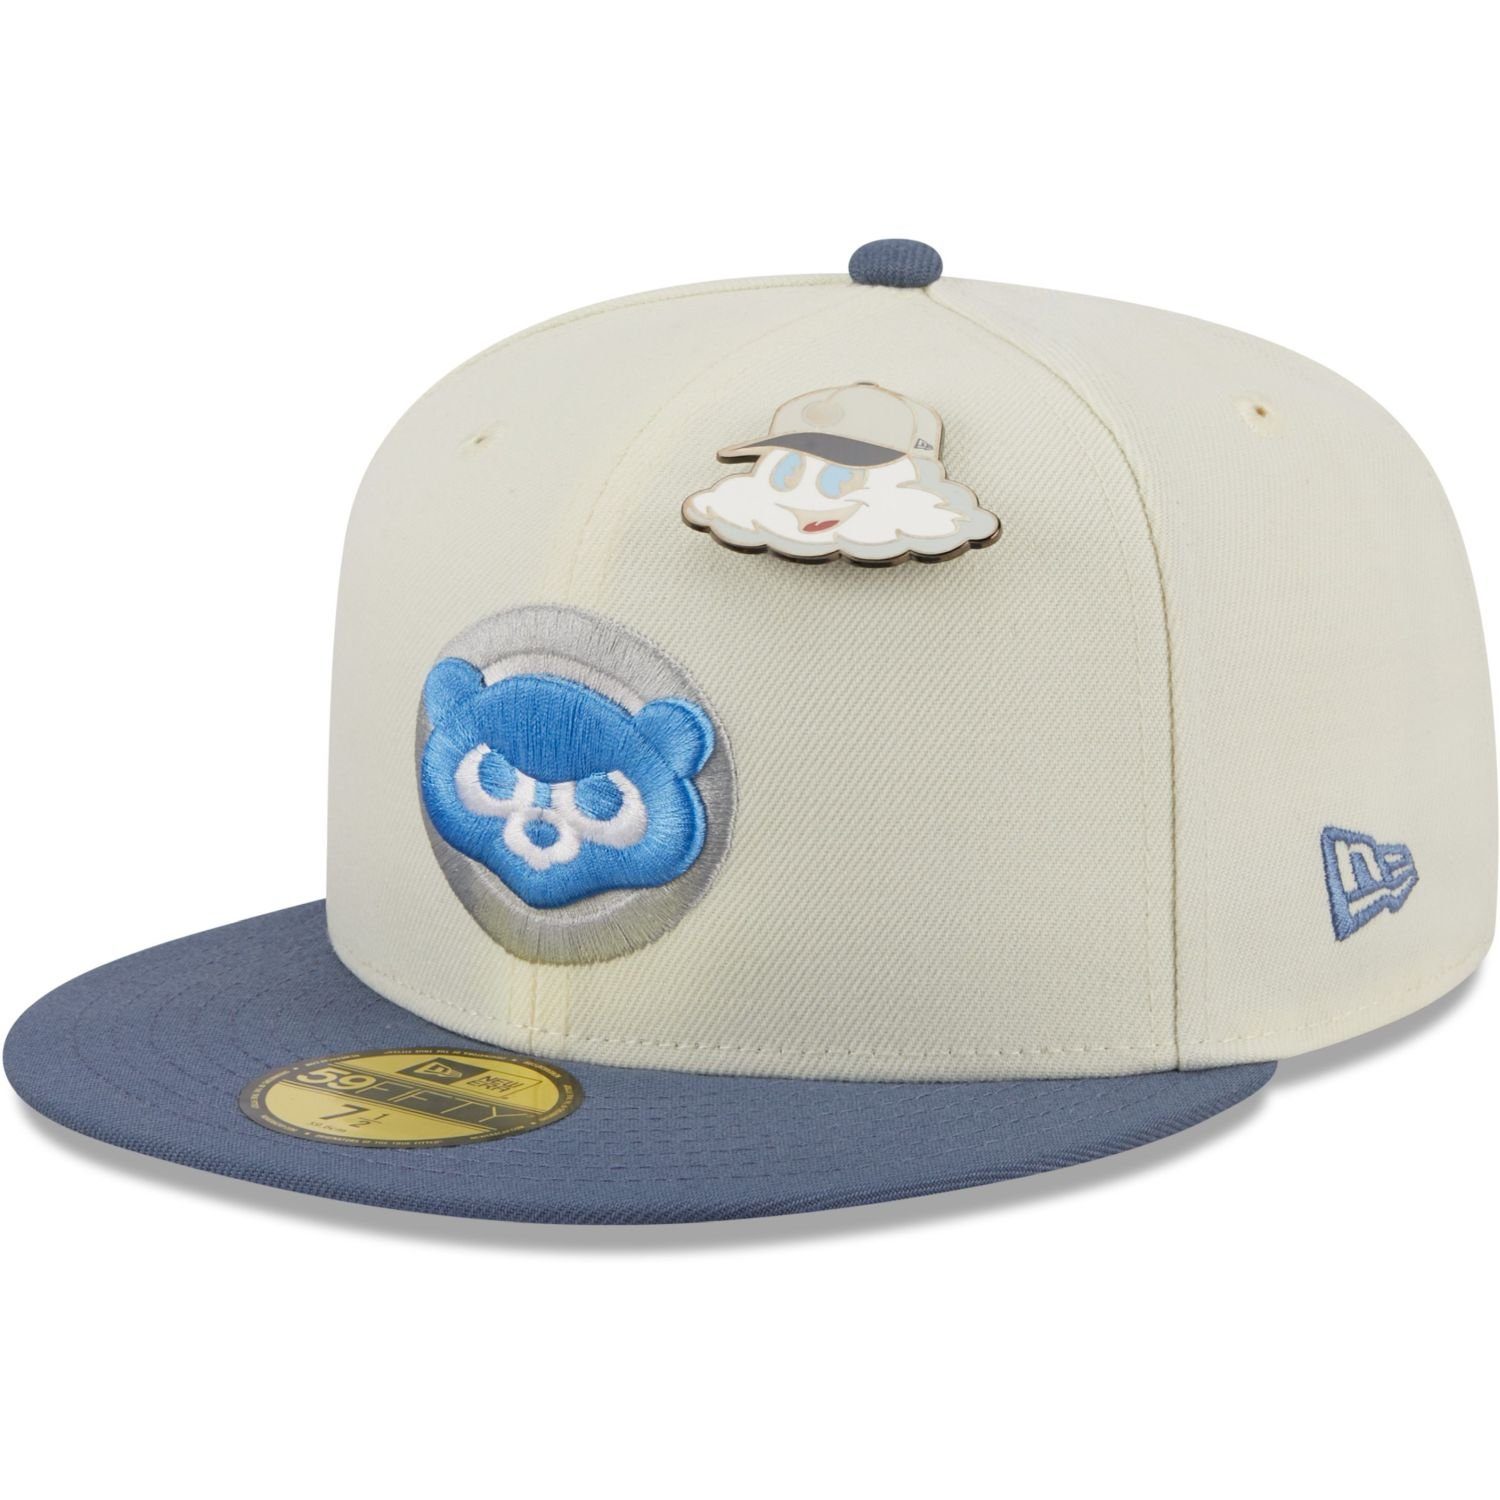 New Era Fitted Cap 59Fifty ELEMENTS PIN Chicago Cubs